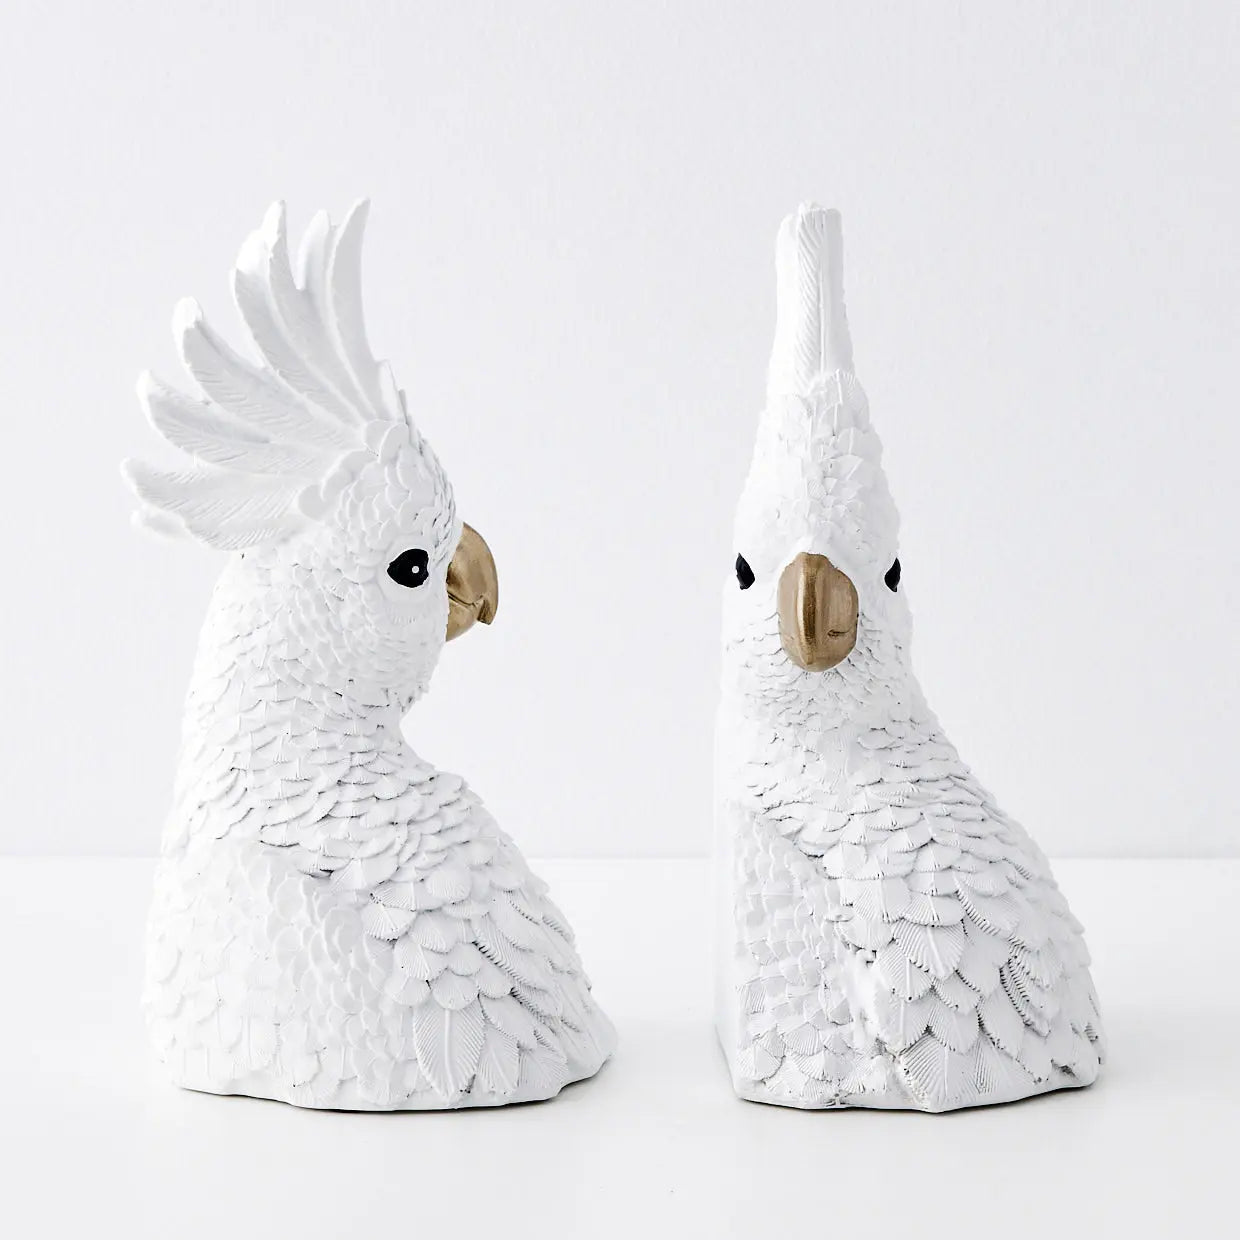 Cockatoo's Better Than One Resin Bookends - GigiandTom